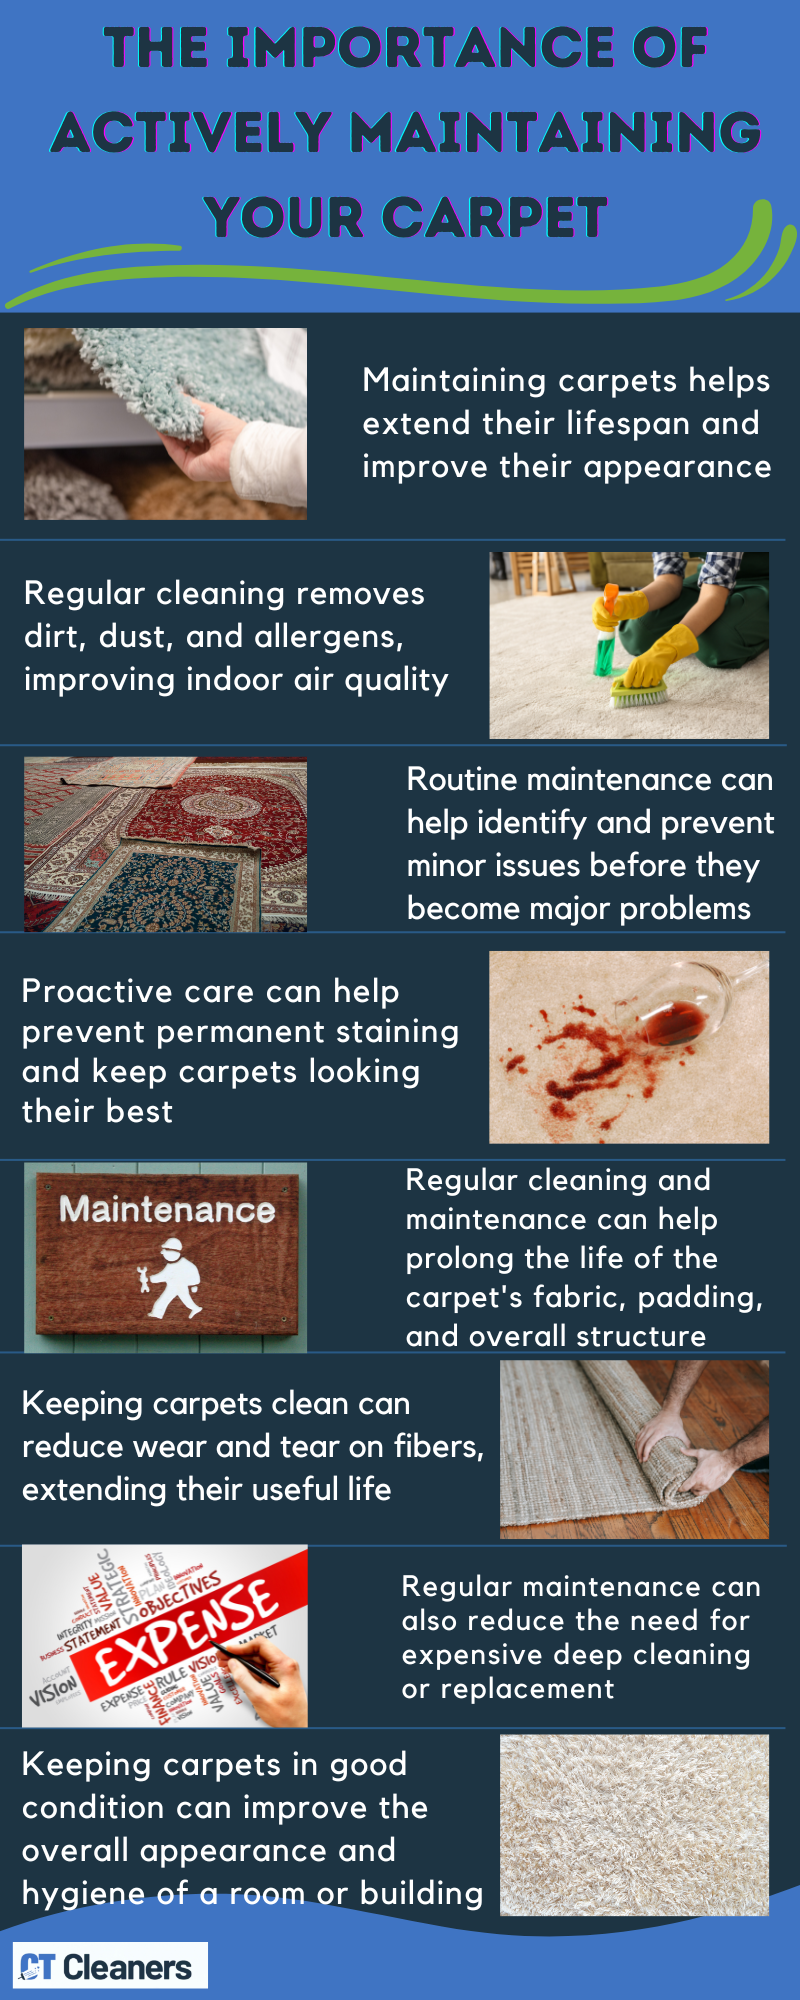 The Importance of Actively Maintaining Your Carpet